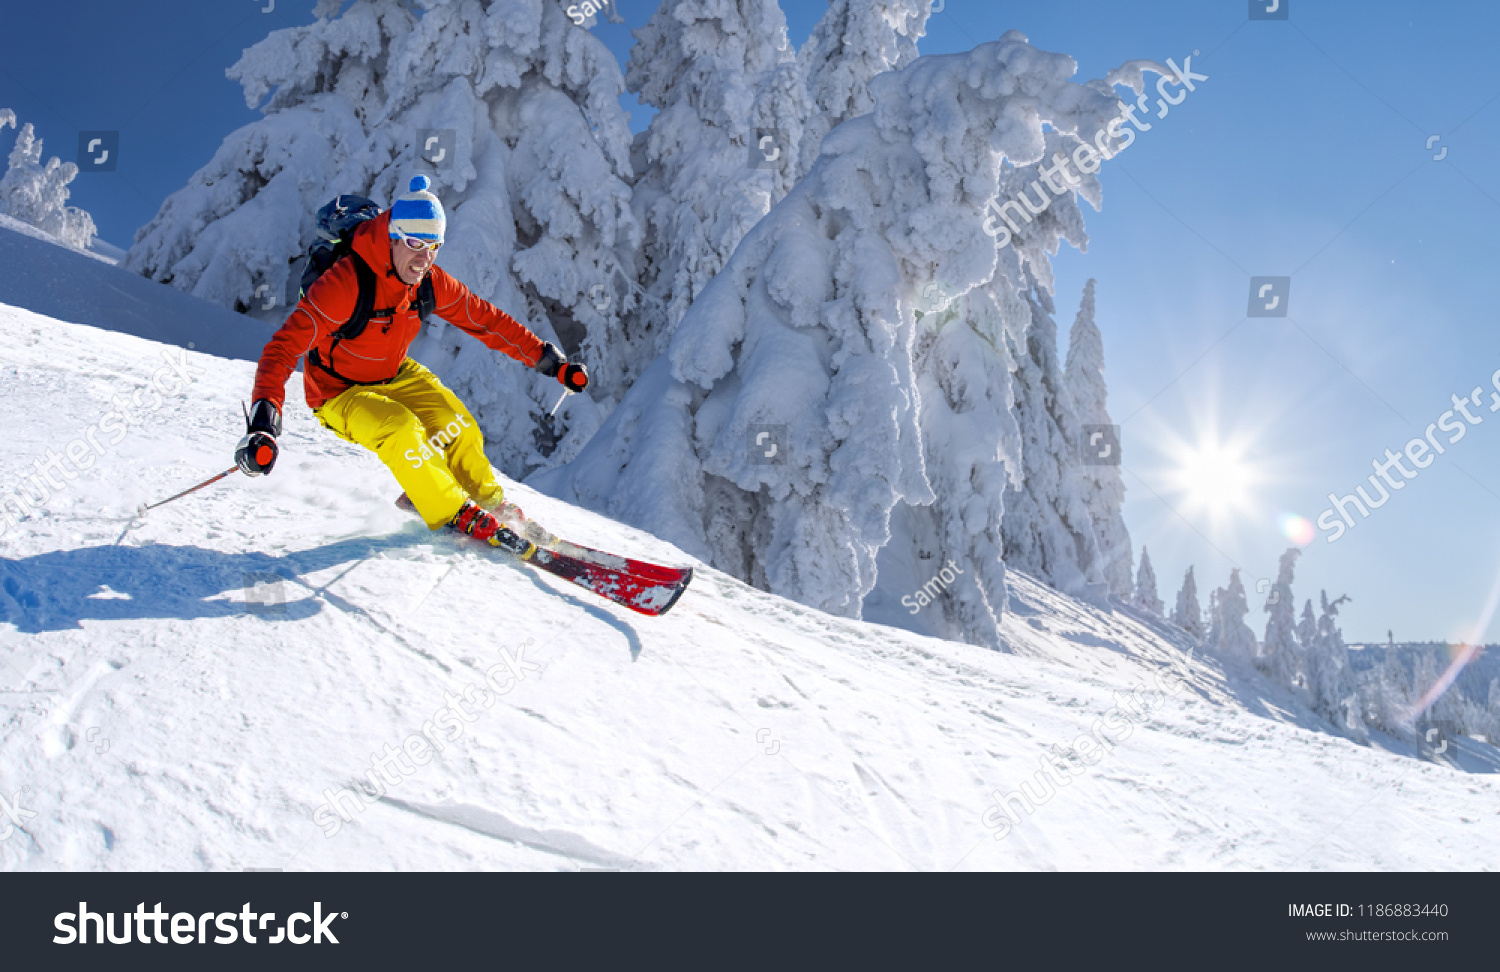 Skier skiing downhill in high mountains against blue sky #1186883440